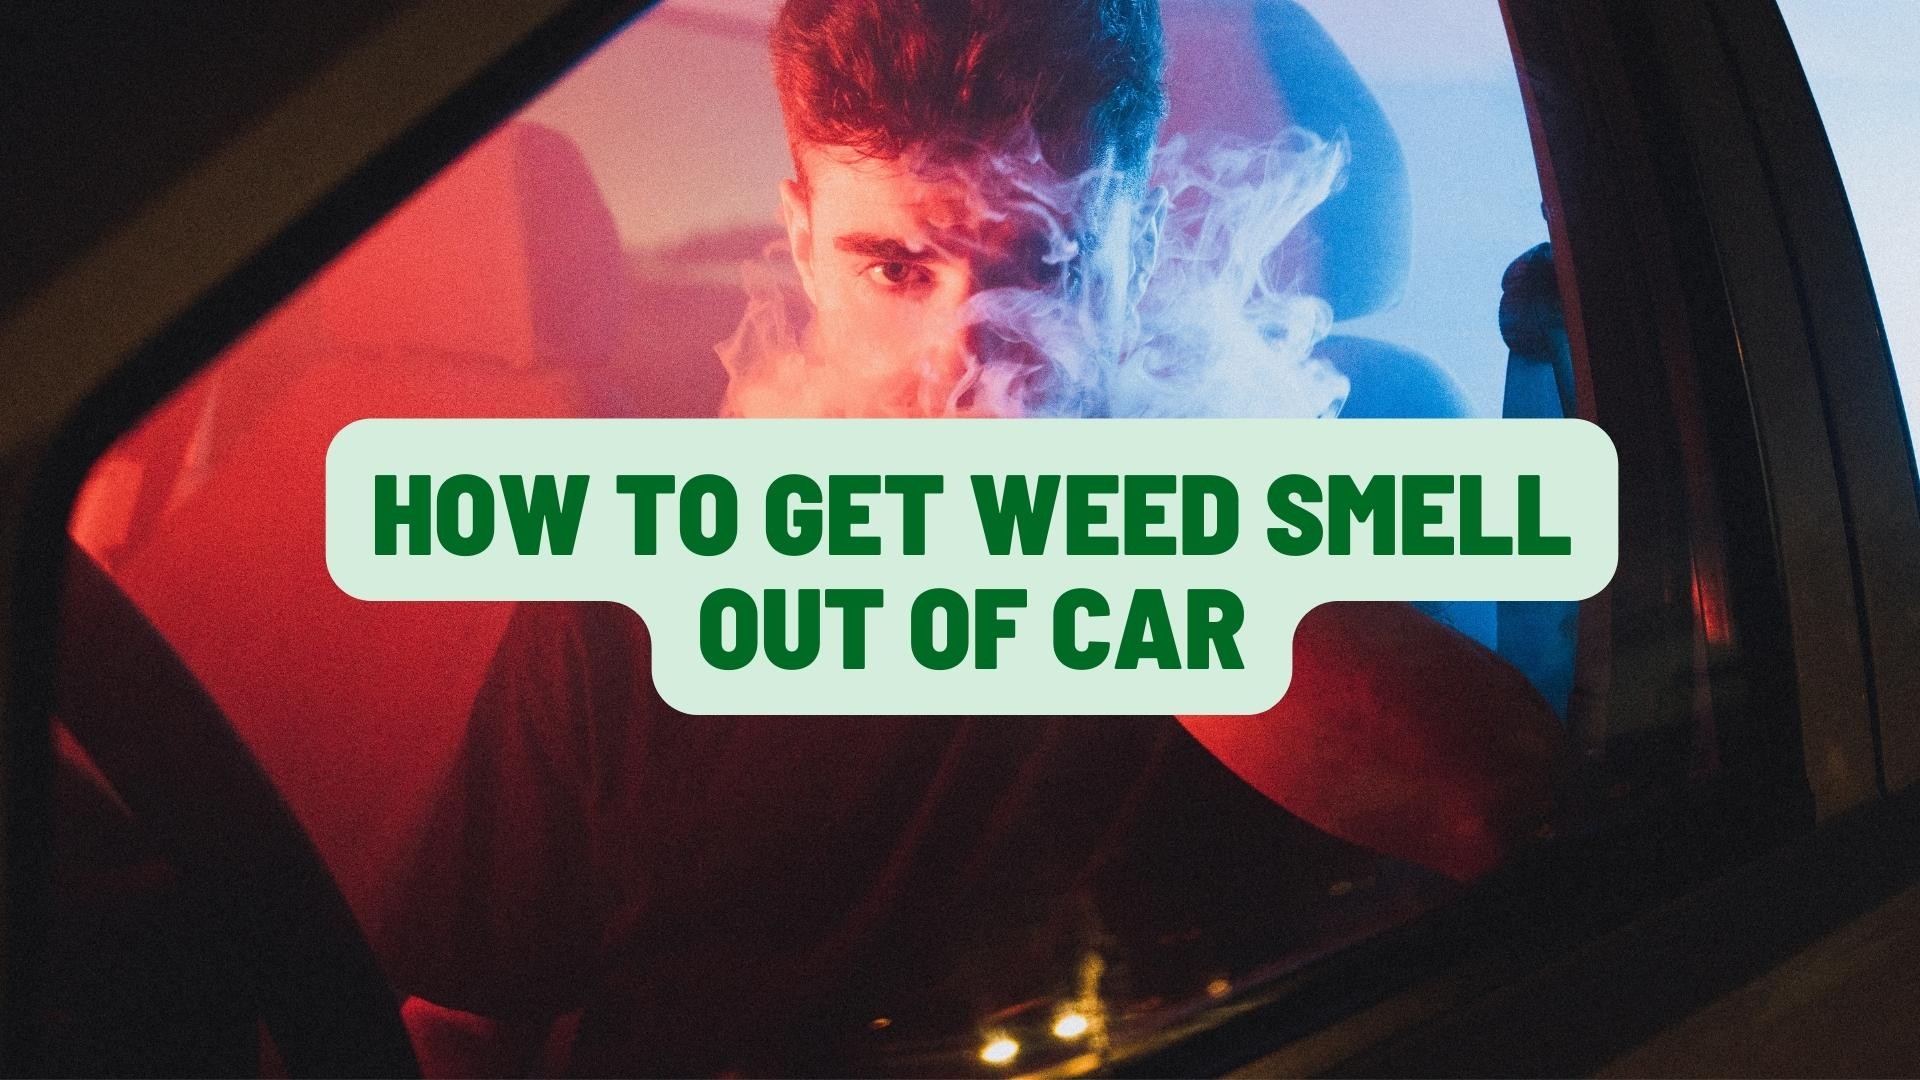 How to Get Weed Smell Out of a Car